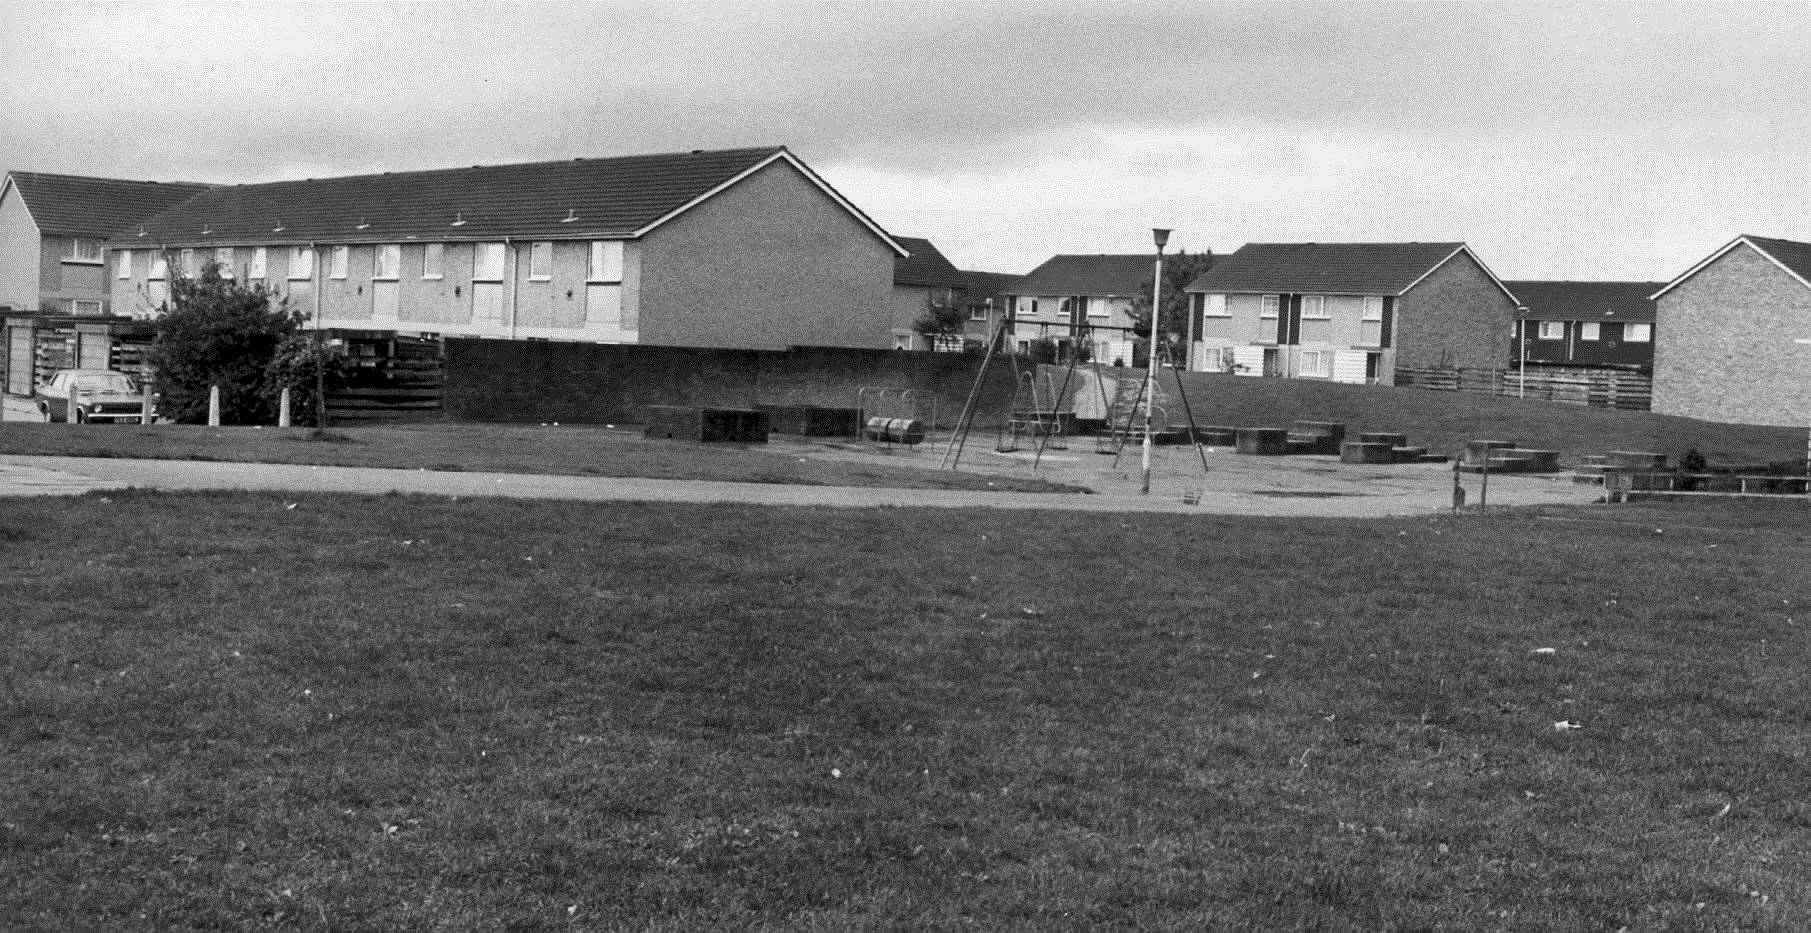 Pictured in October 1982, the estate soon filled up with residents new to Kent